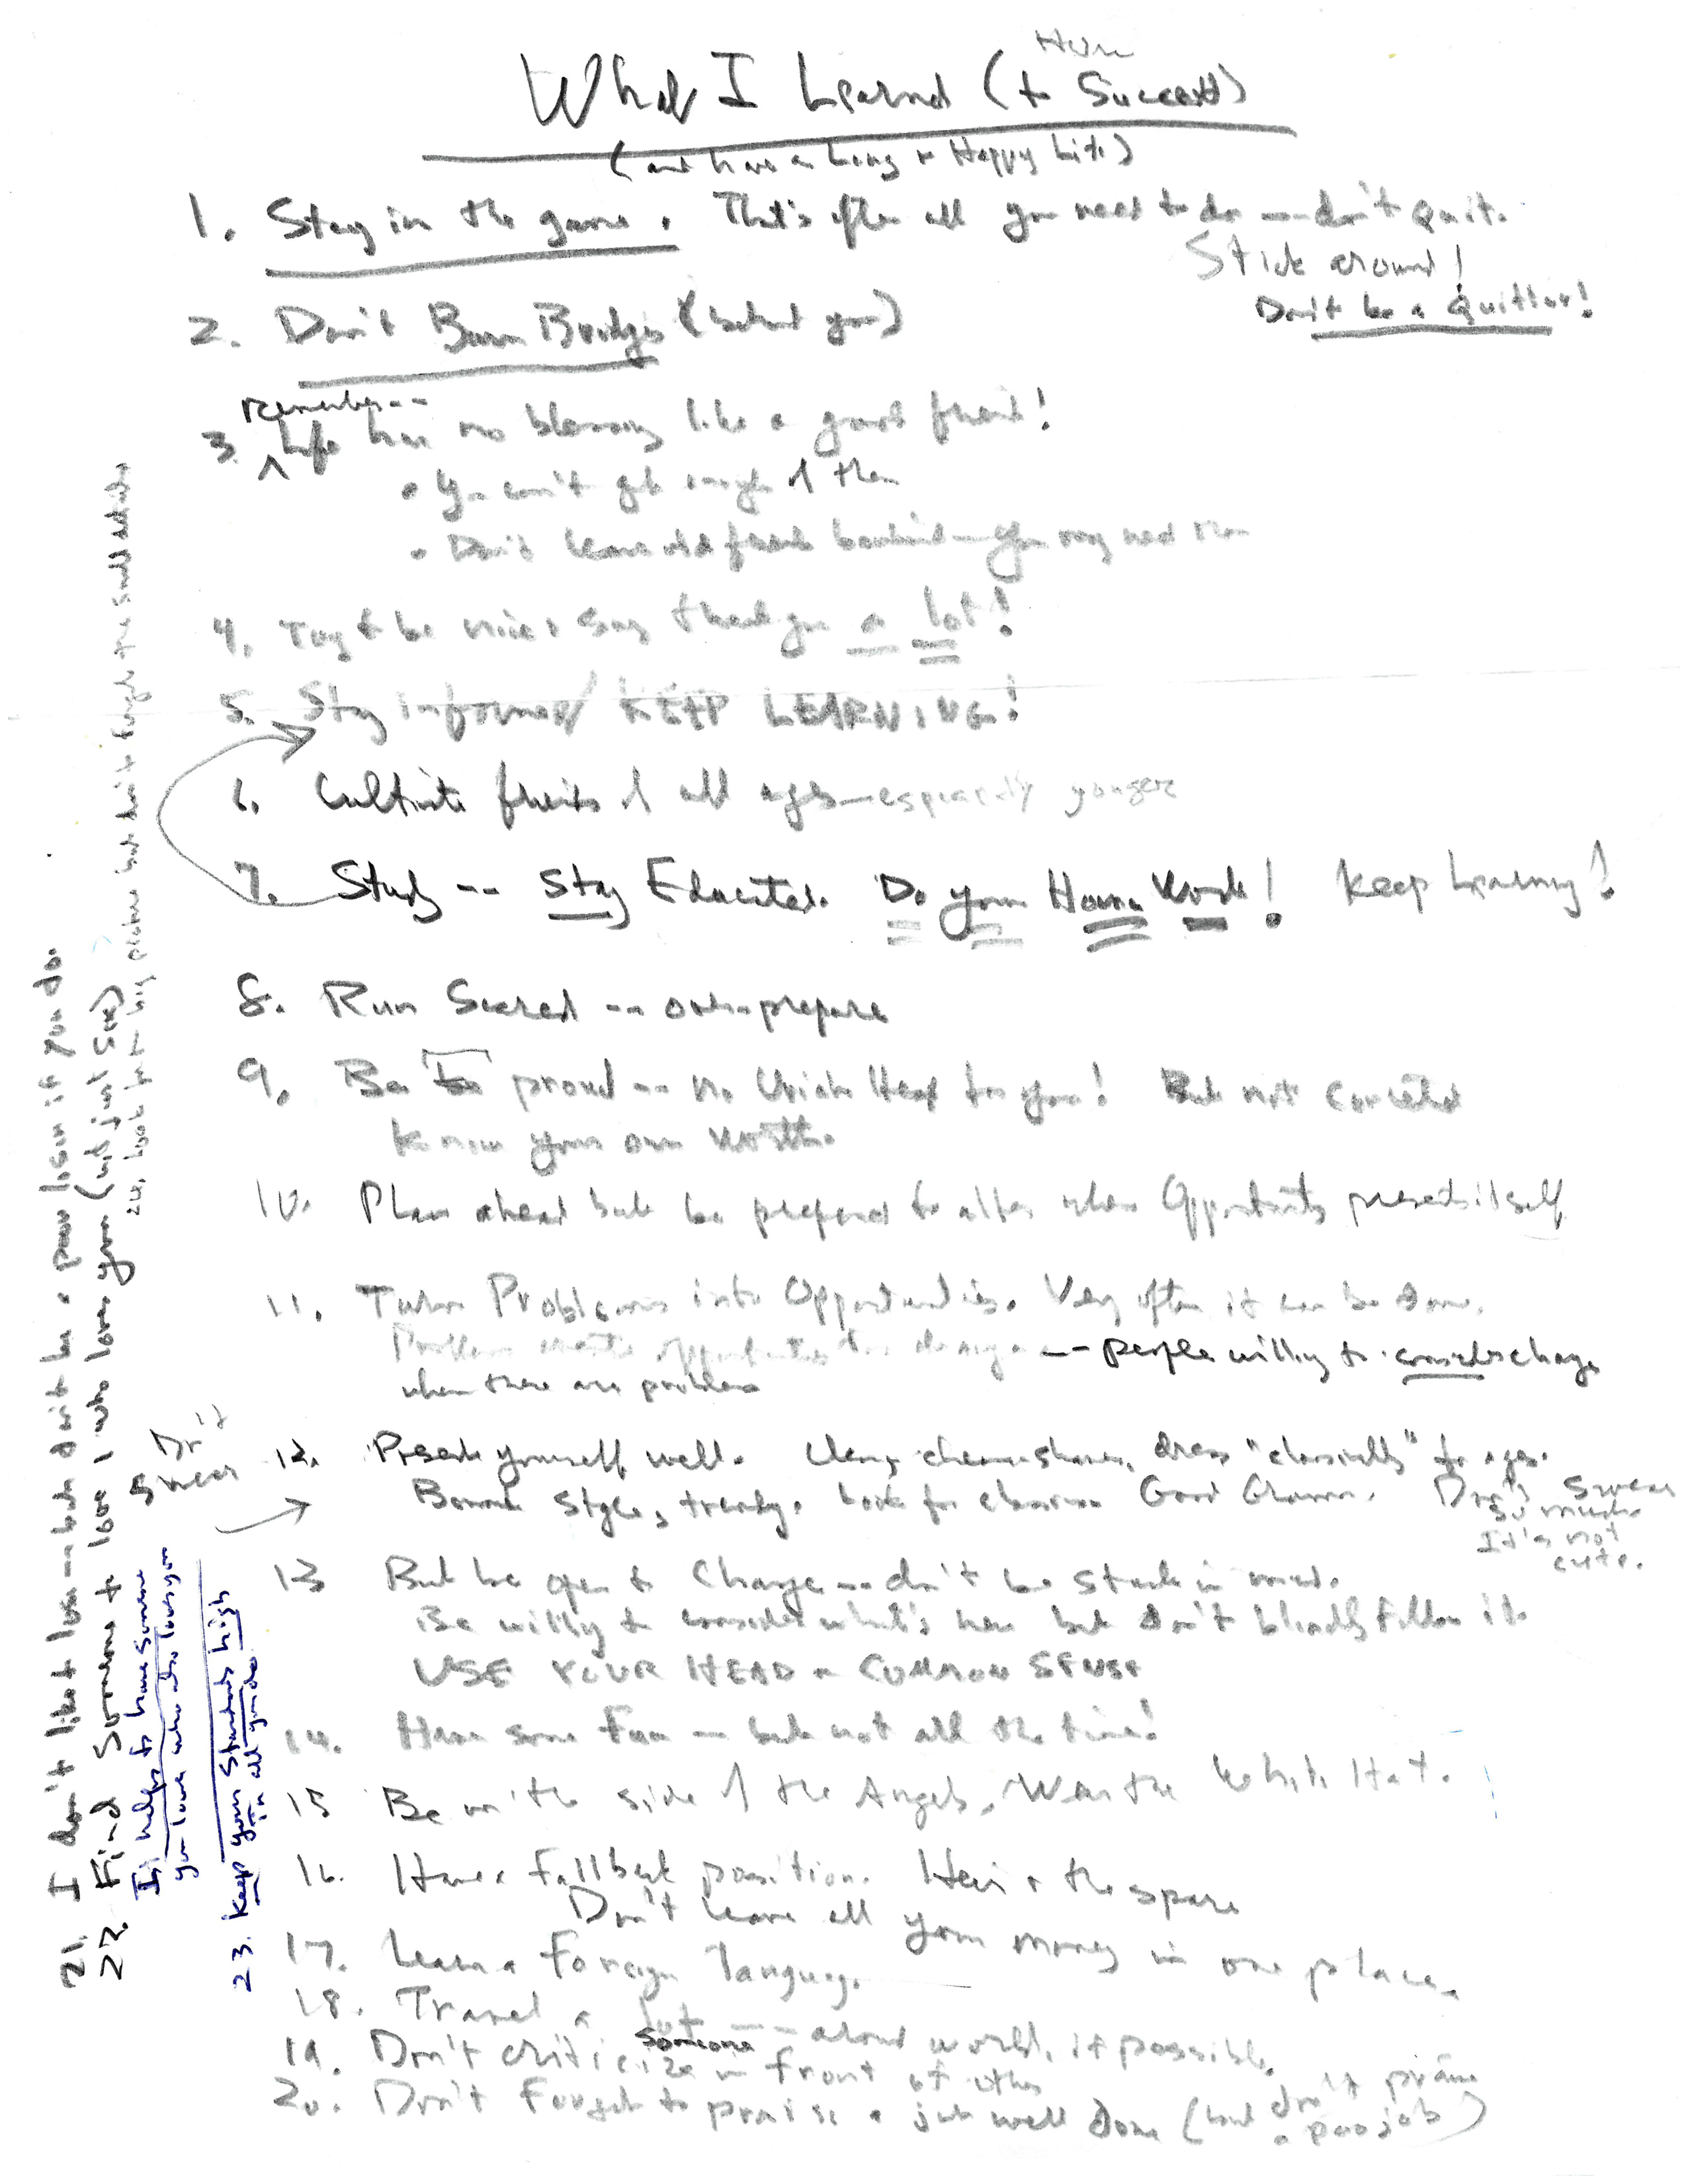 Richard Jenrette's handwritten note titled 'What I Learned (How to Succeed)'